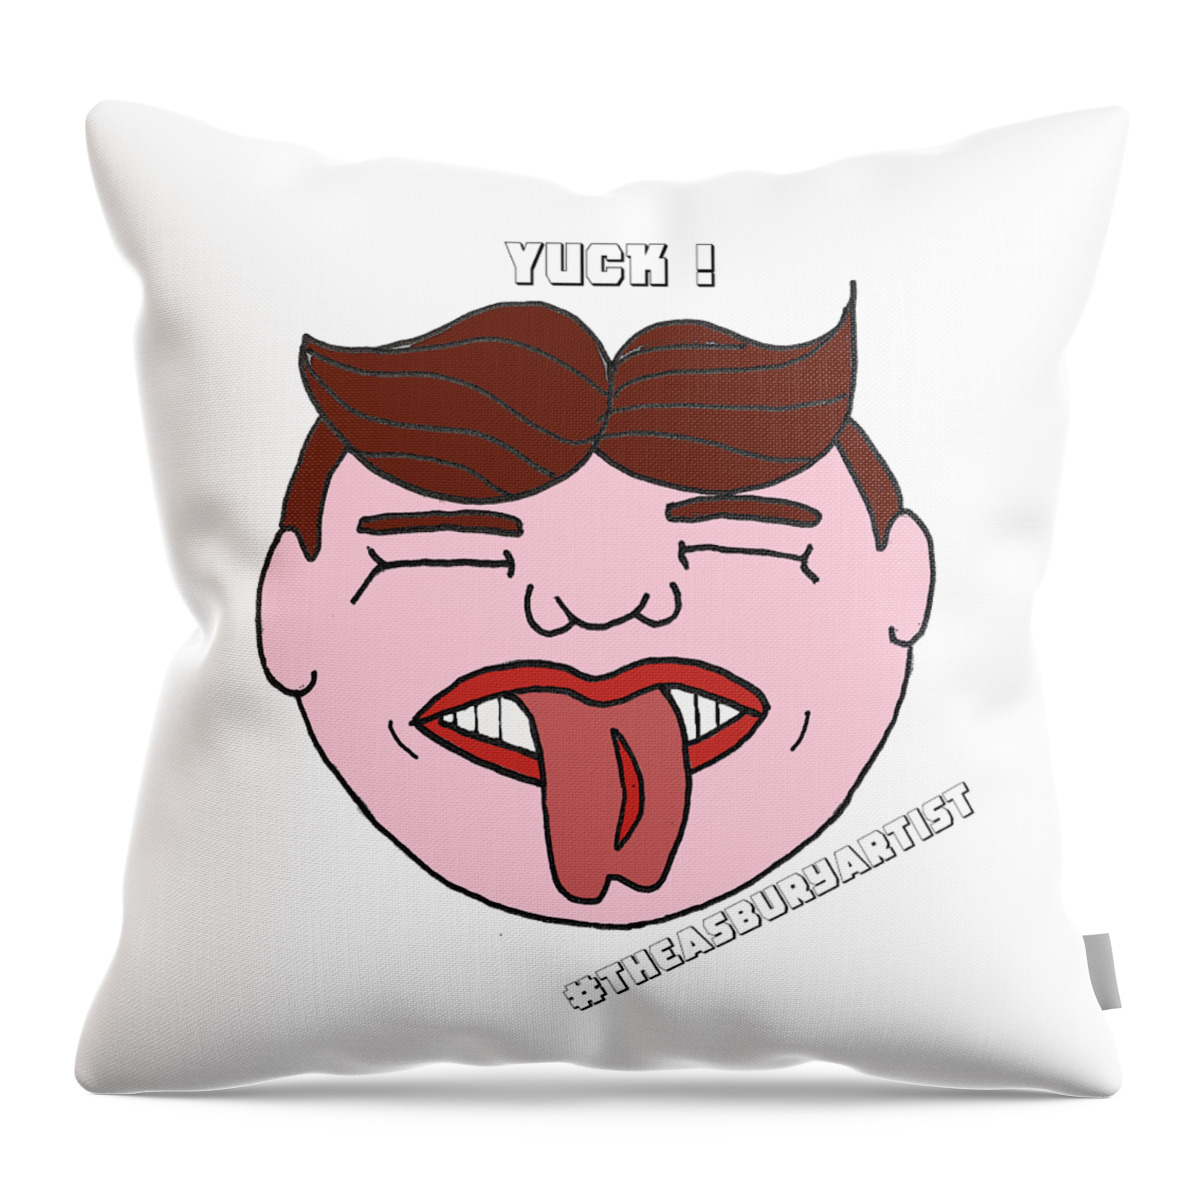  Throw Pillow featuring the painting Yuck by Patricia Arroyo